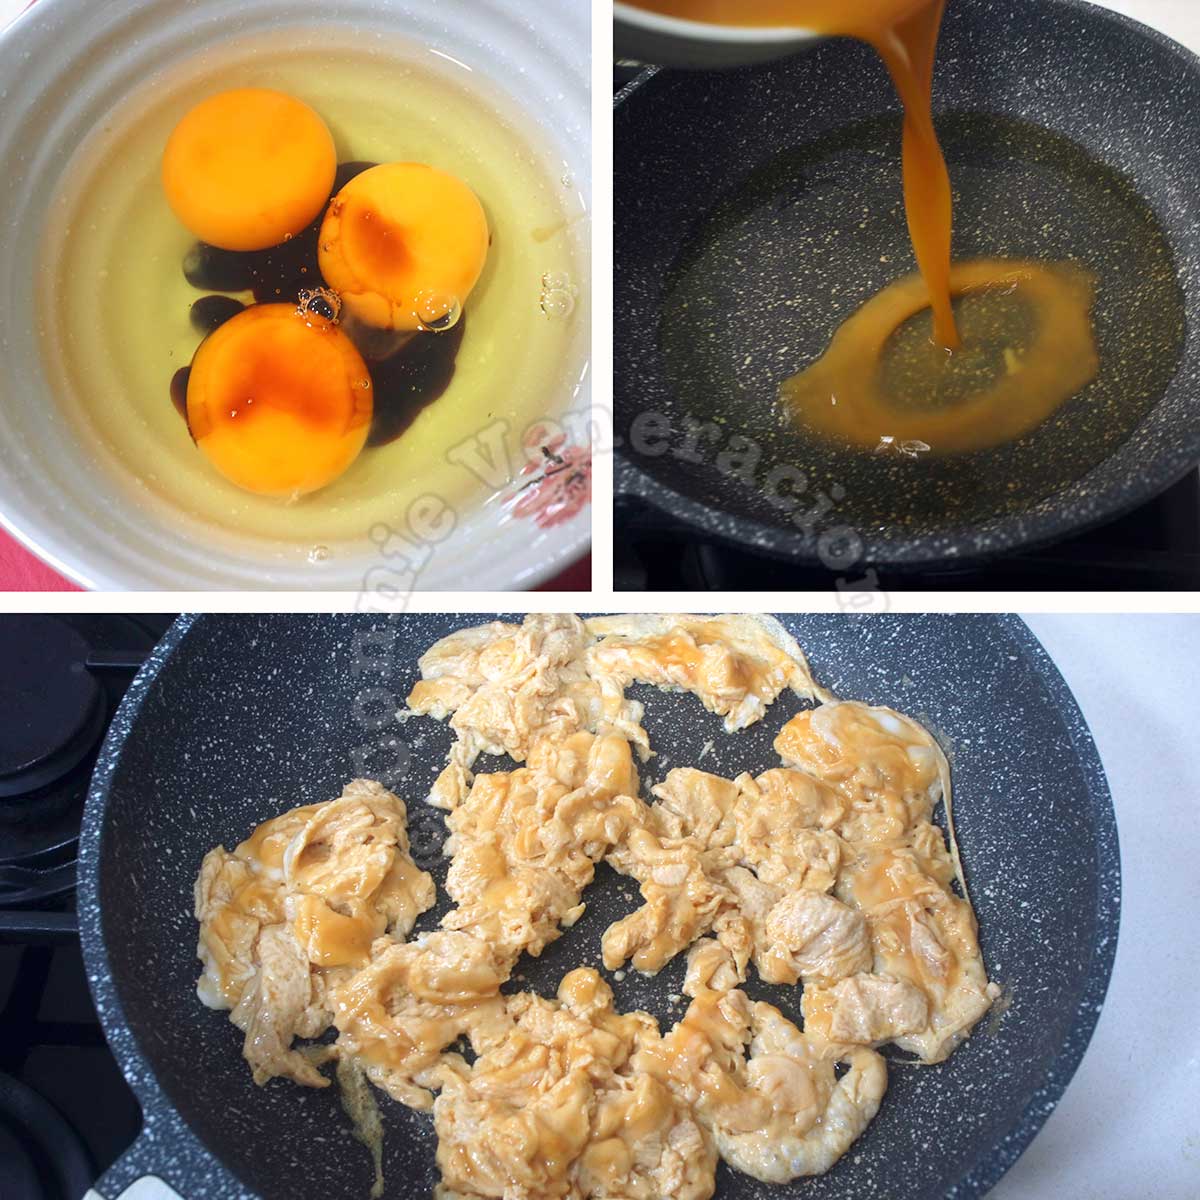 Scrambled eggs with soy sauce